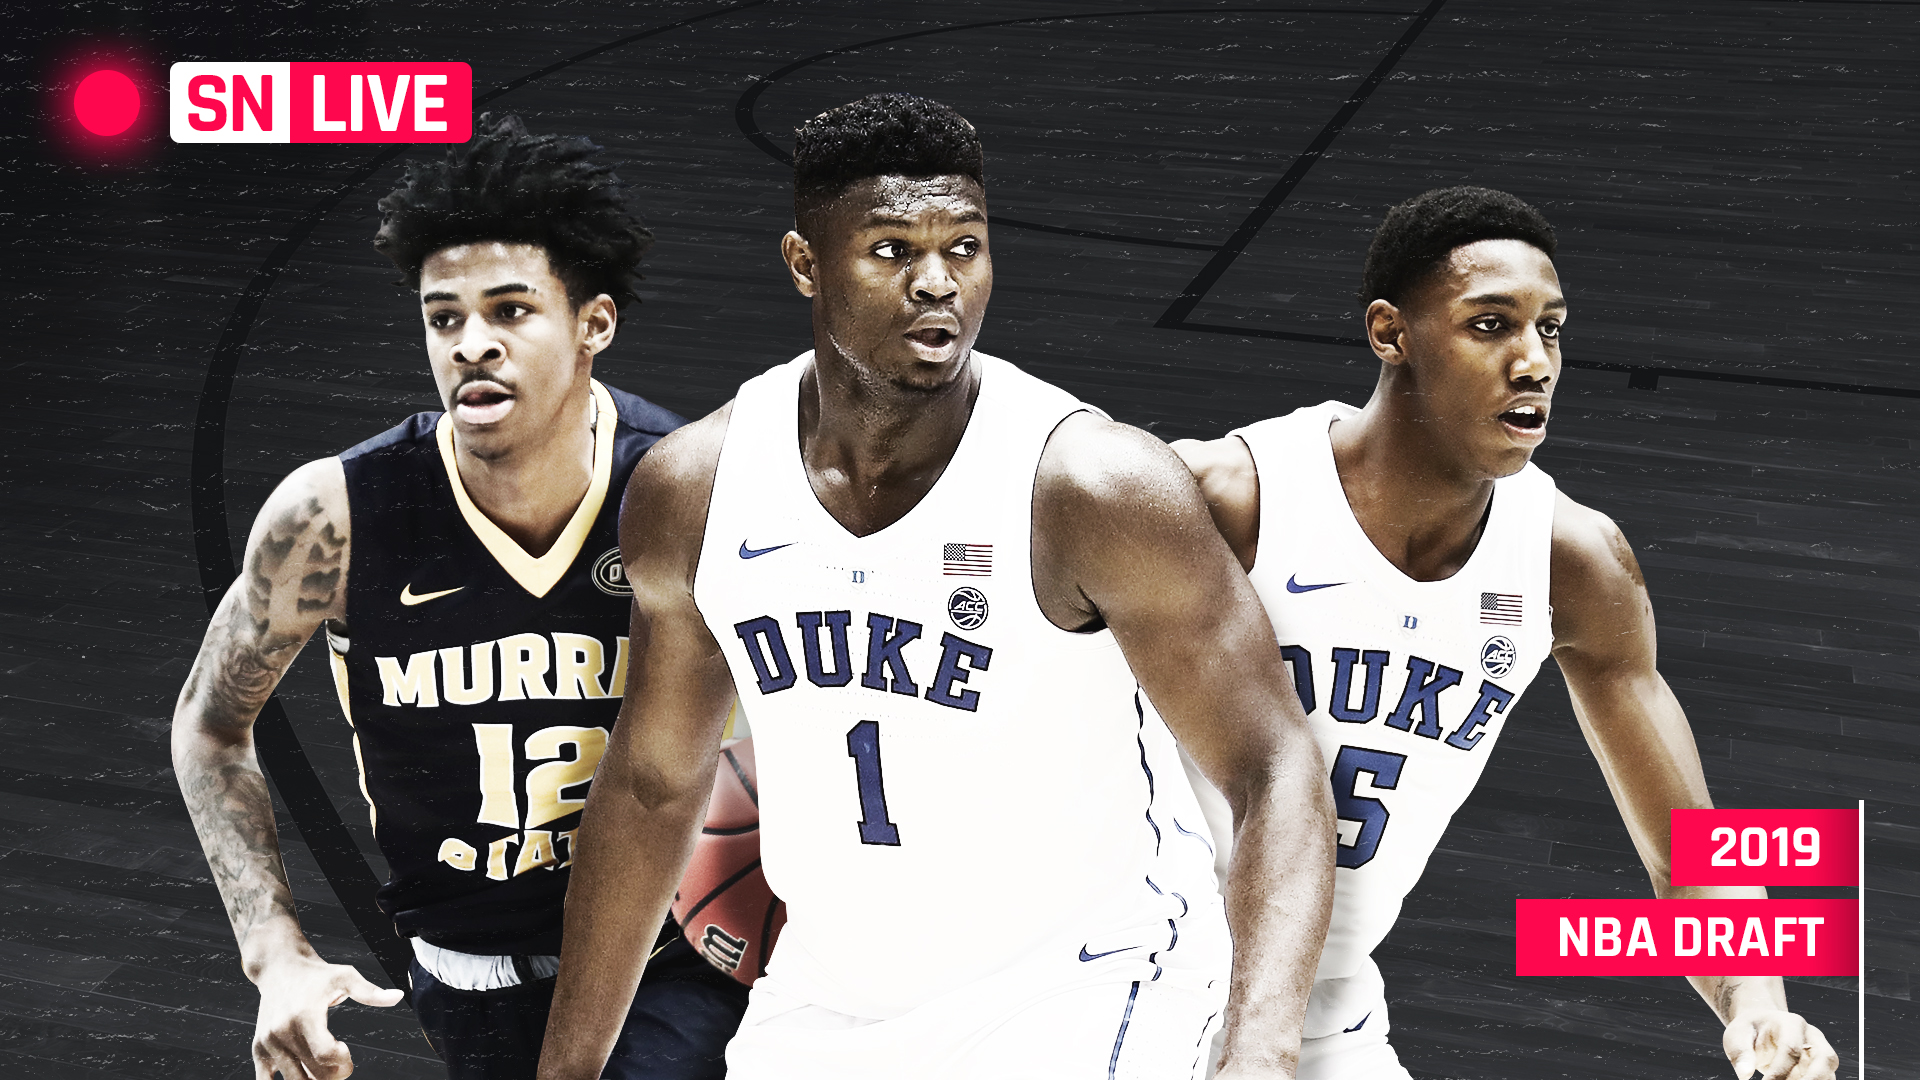 NBA Draft tracker 2019: Live results, grades, pick analysis for Rounds 1-2 | Sporting News